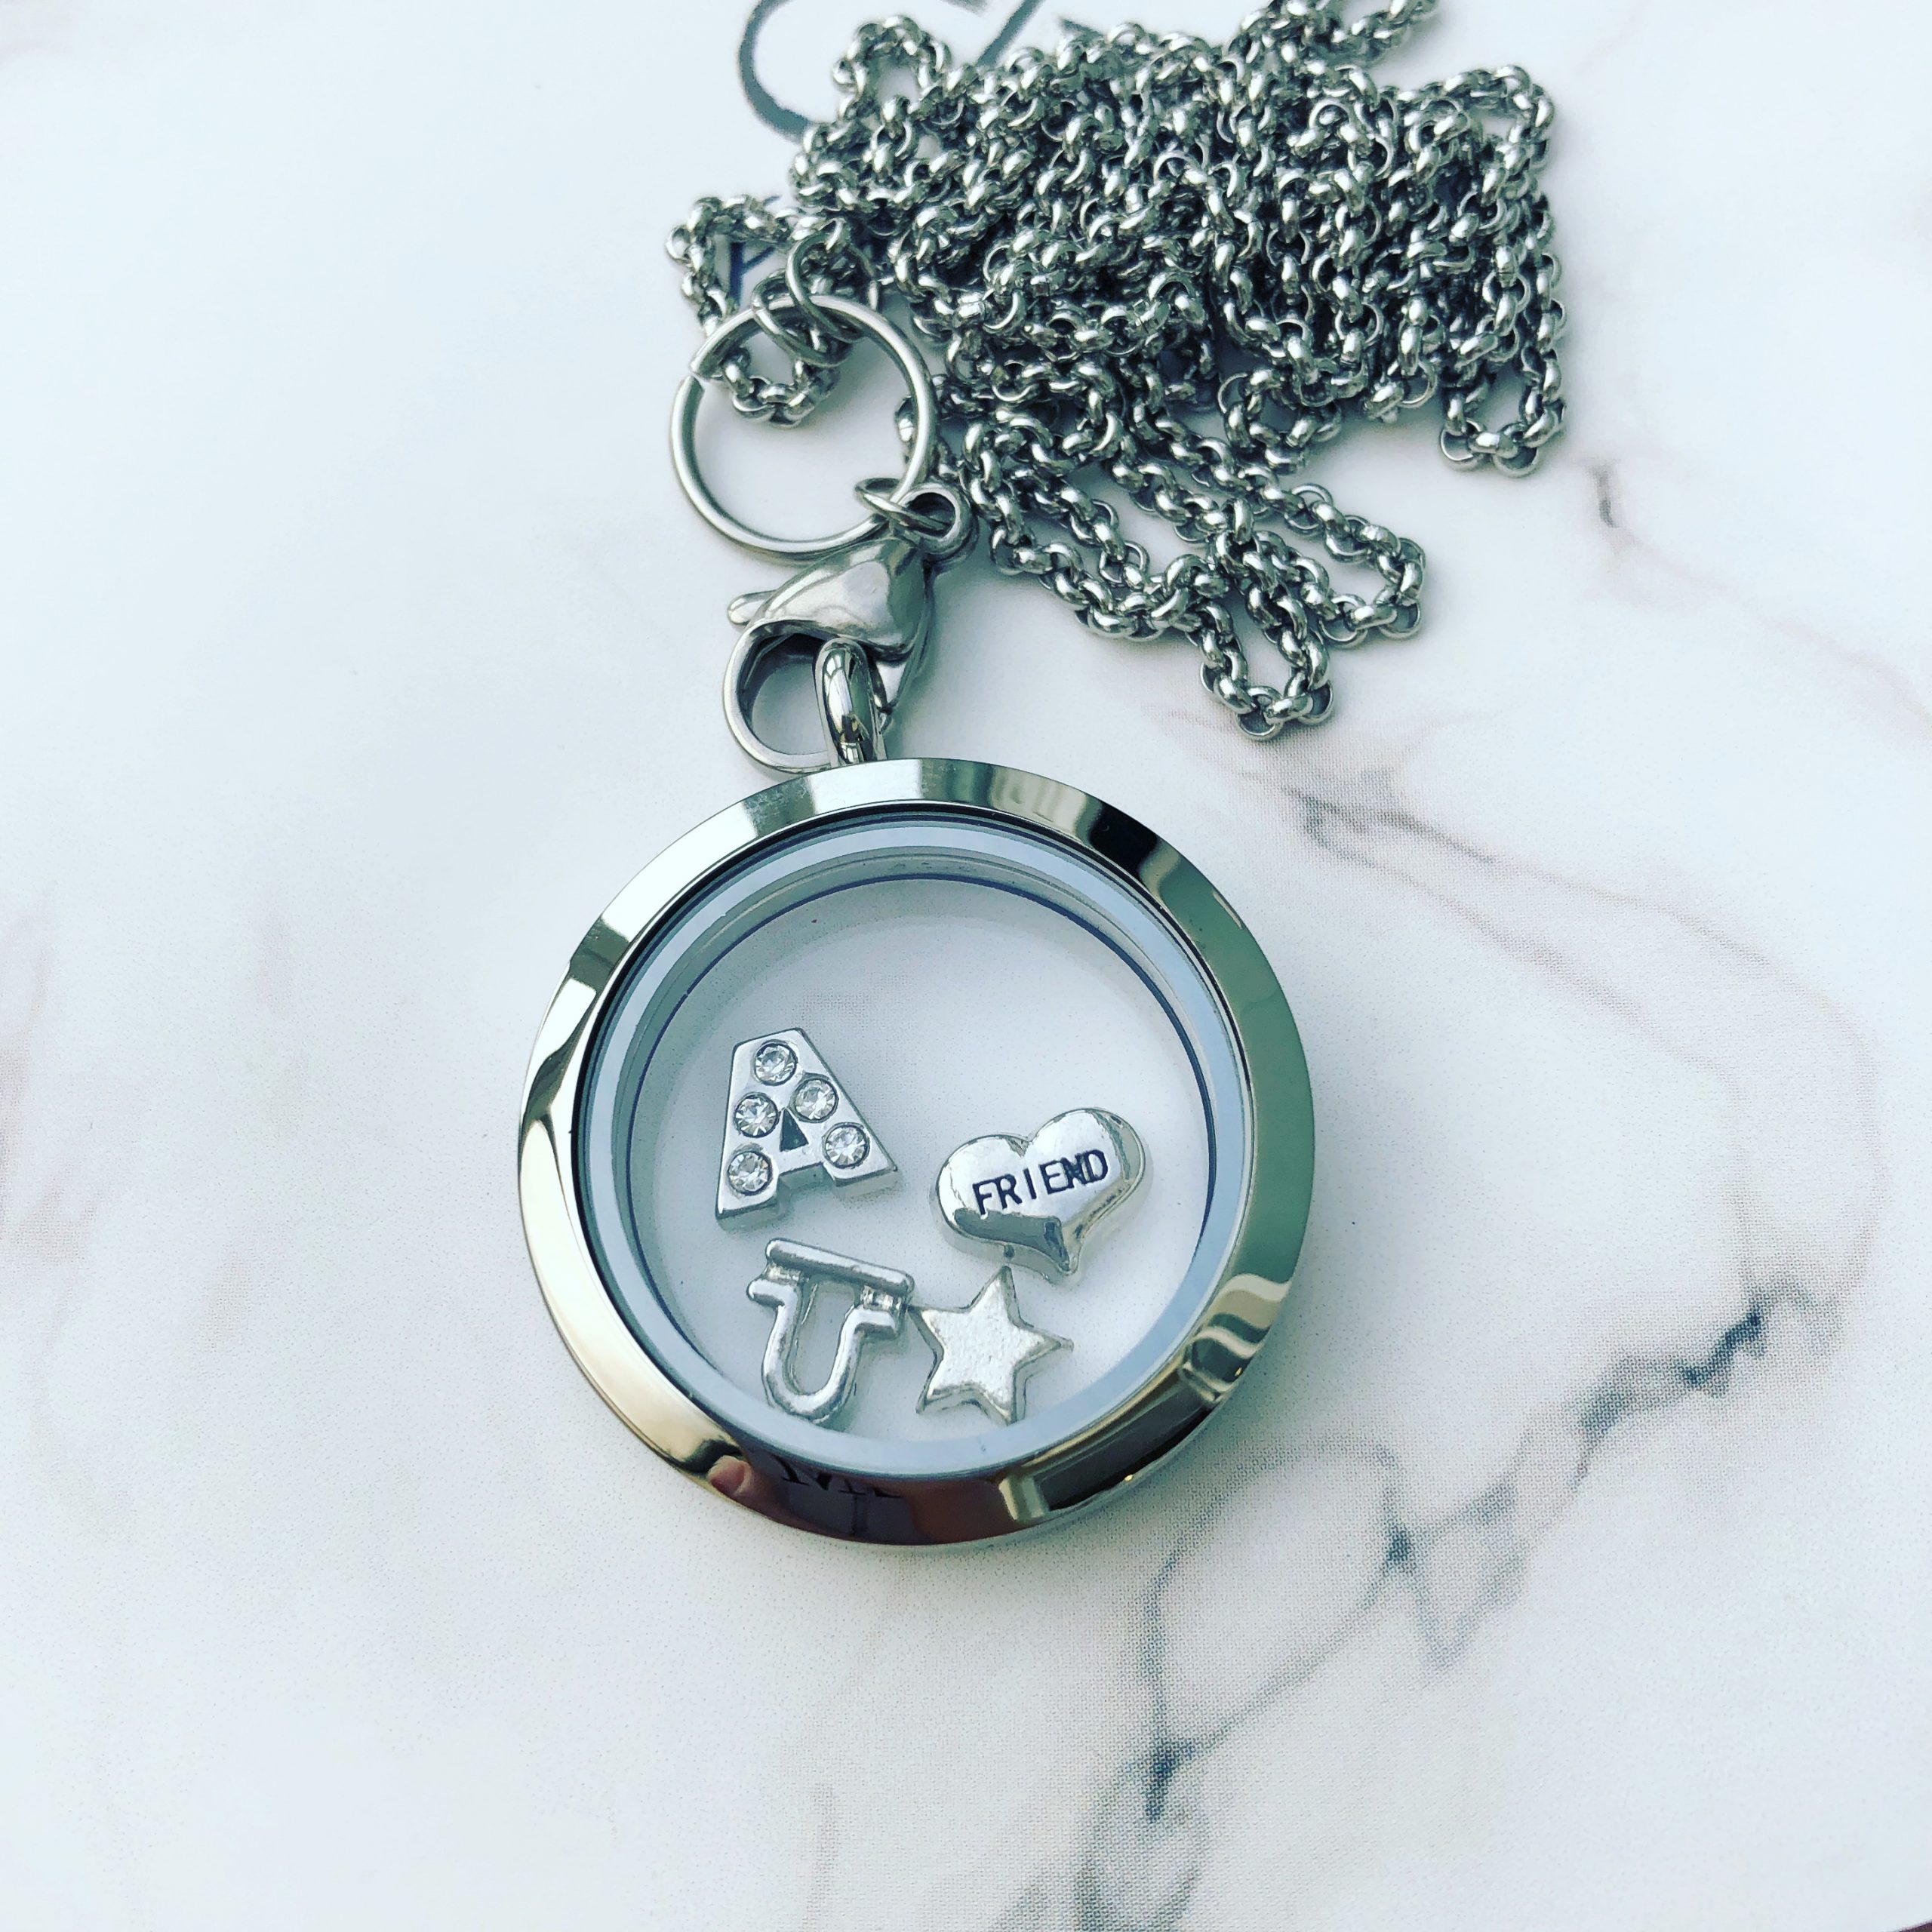 Charm pendant - Build your own customize charm locket - Royal Star Jewellery